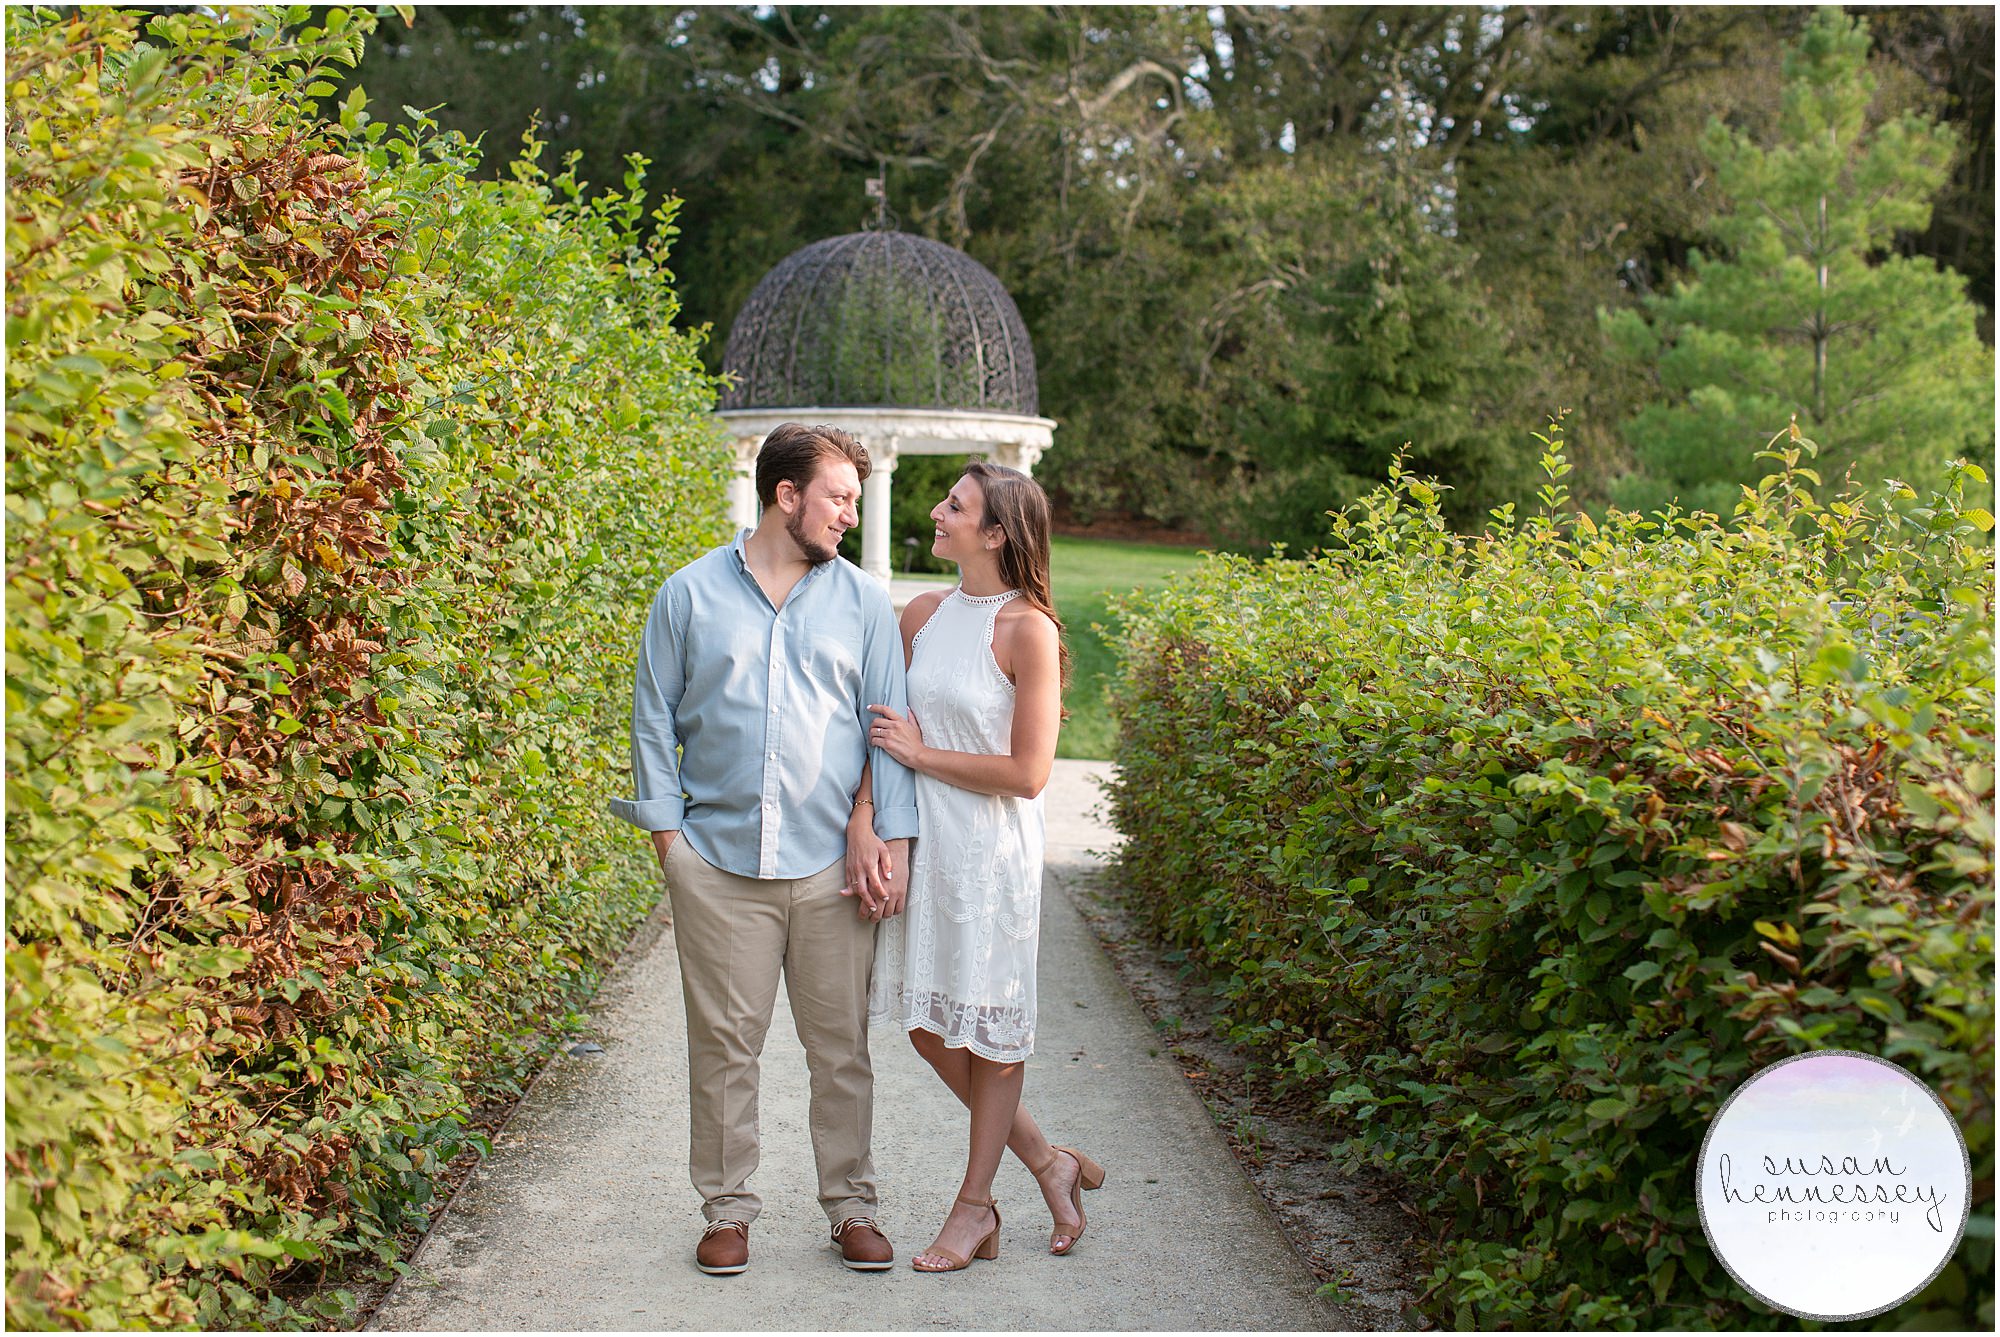 An Engagement Session at Longwood Gardens